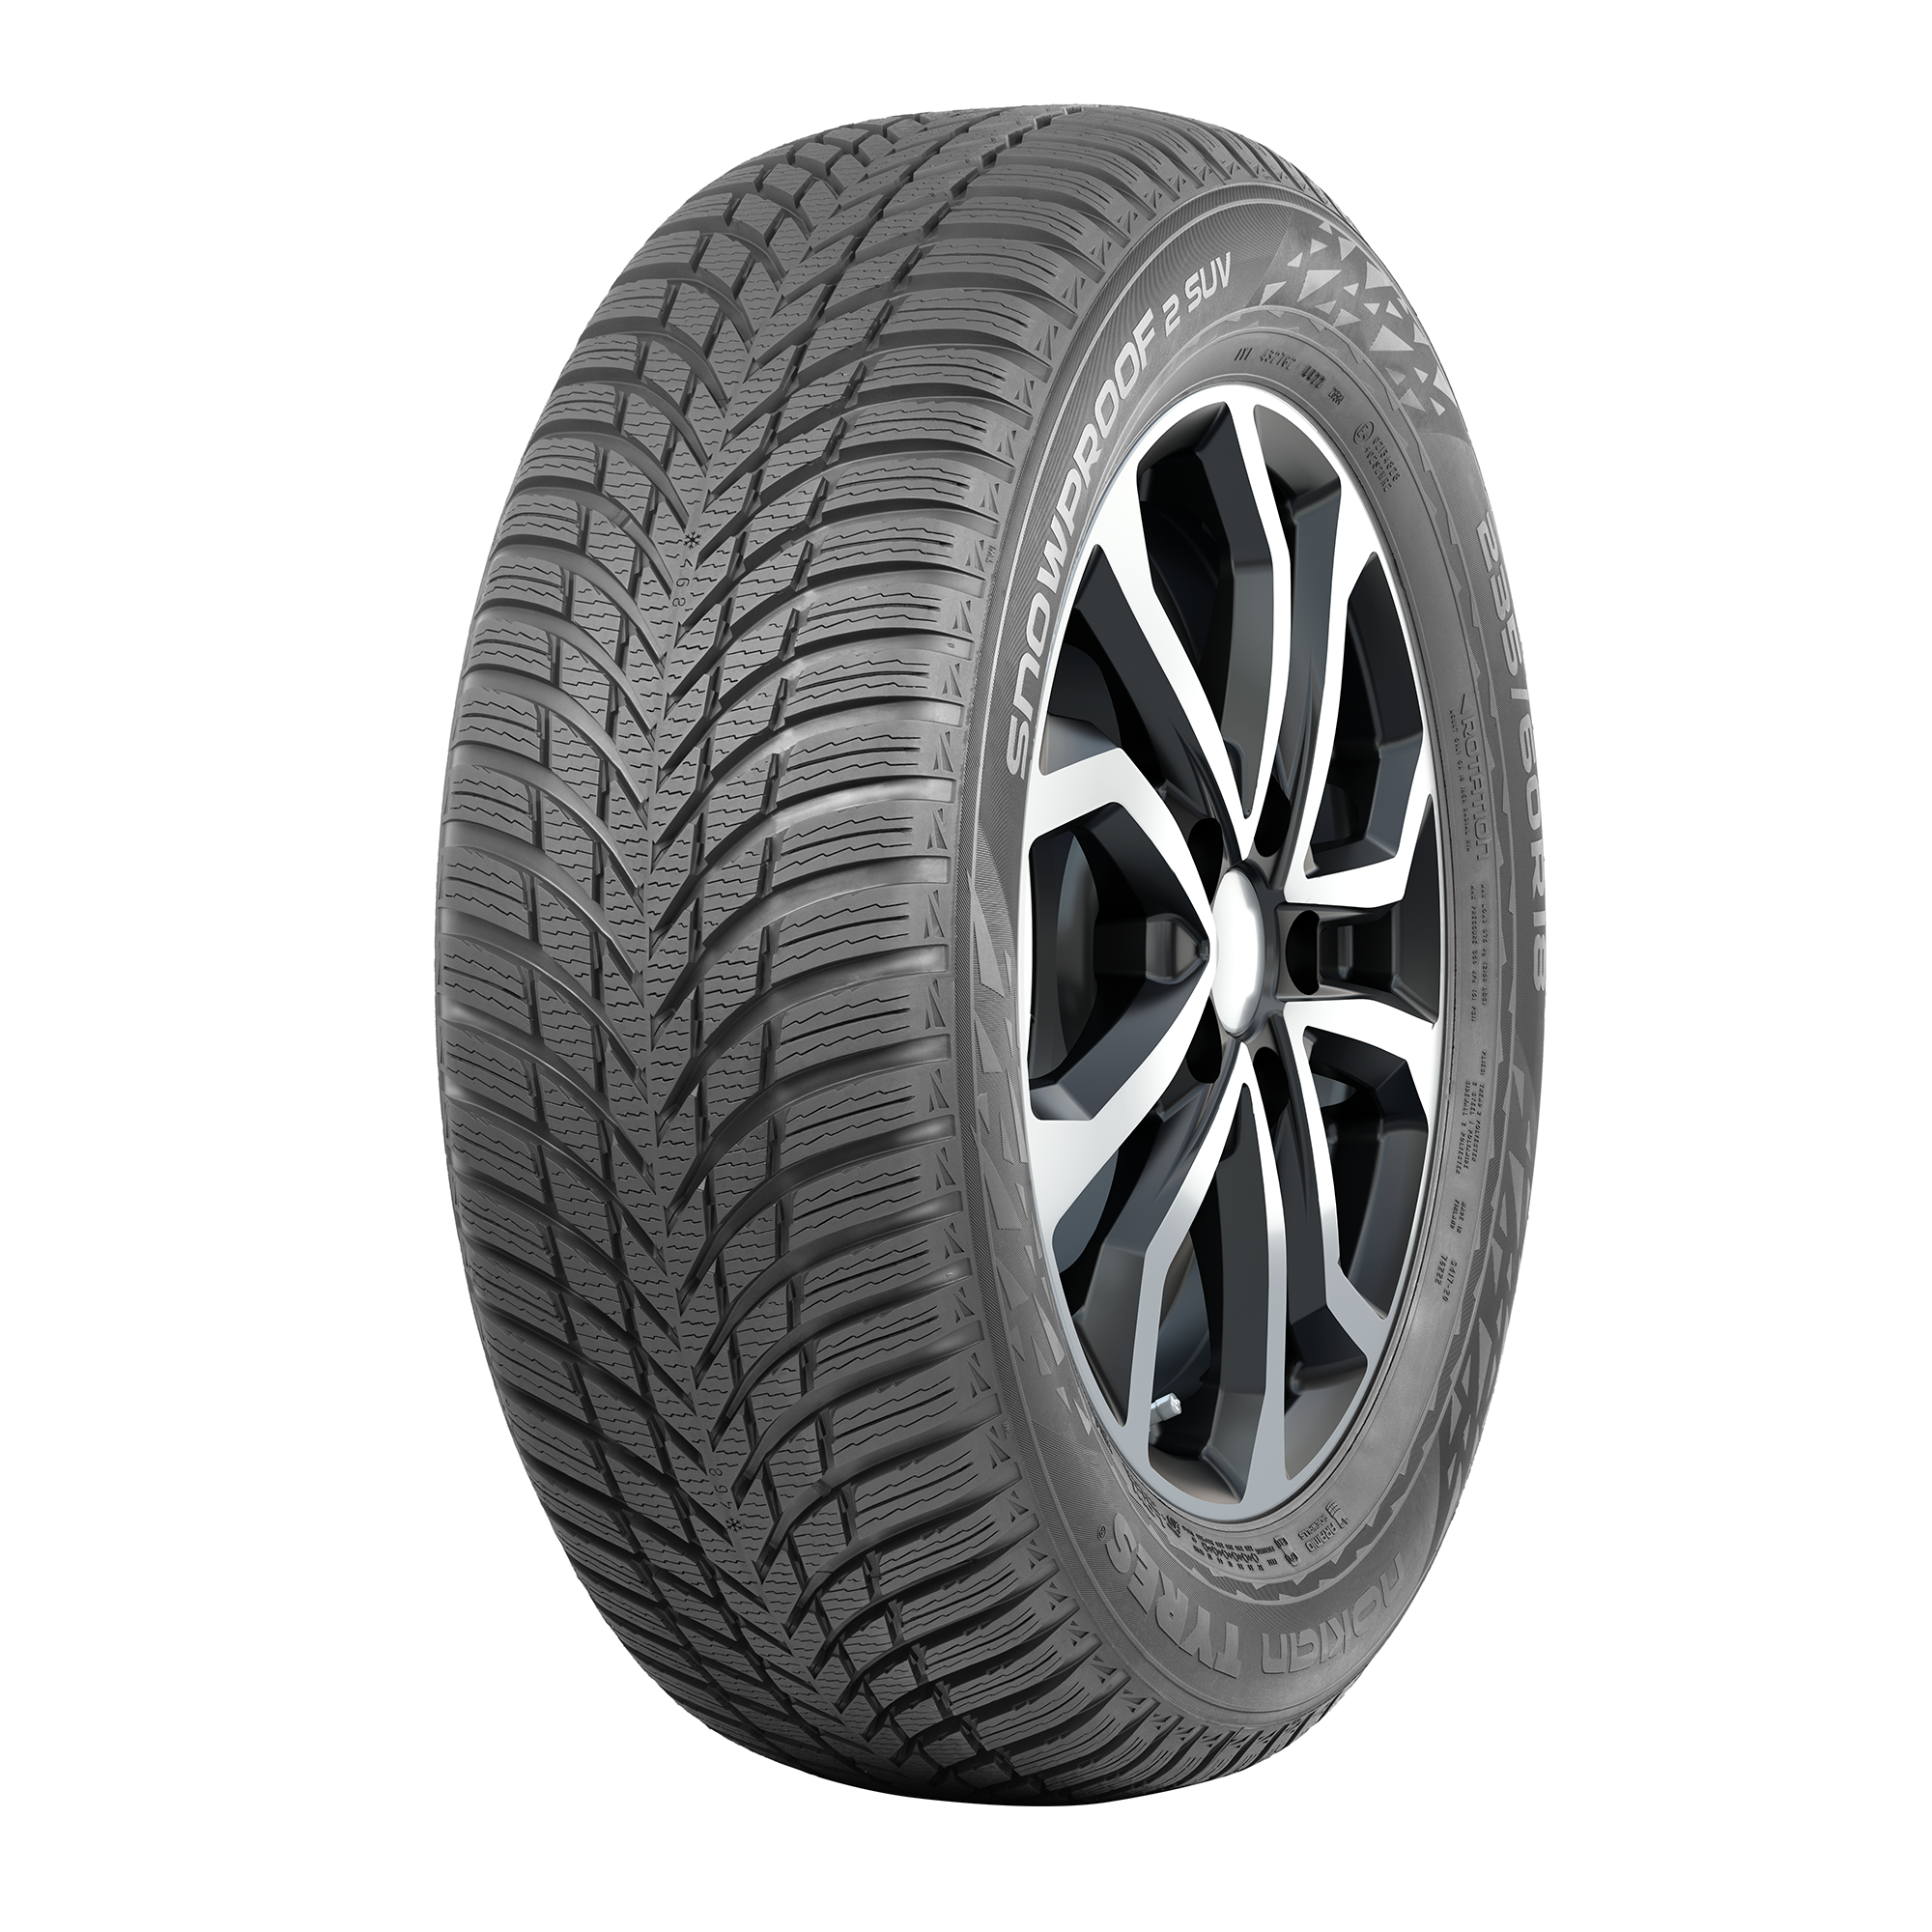 Nokian Tyres Snowproof 2 SUV XL 215/65 R16 102H